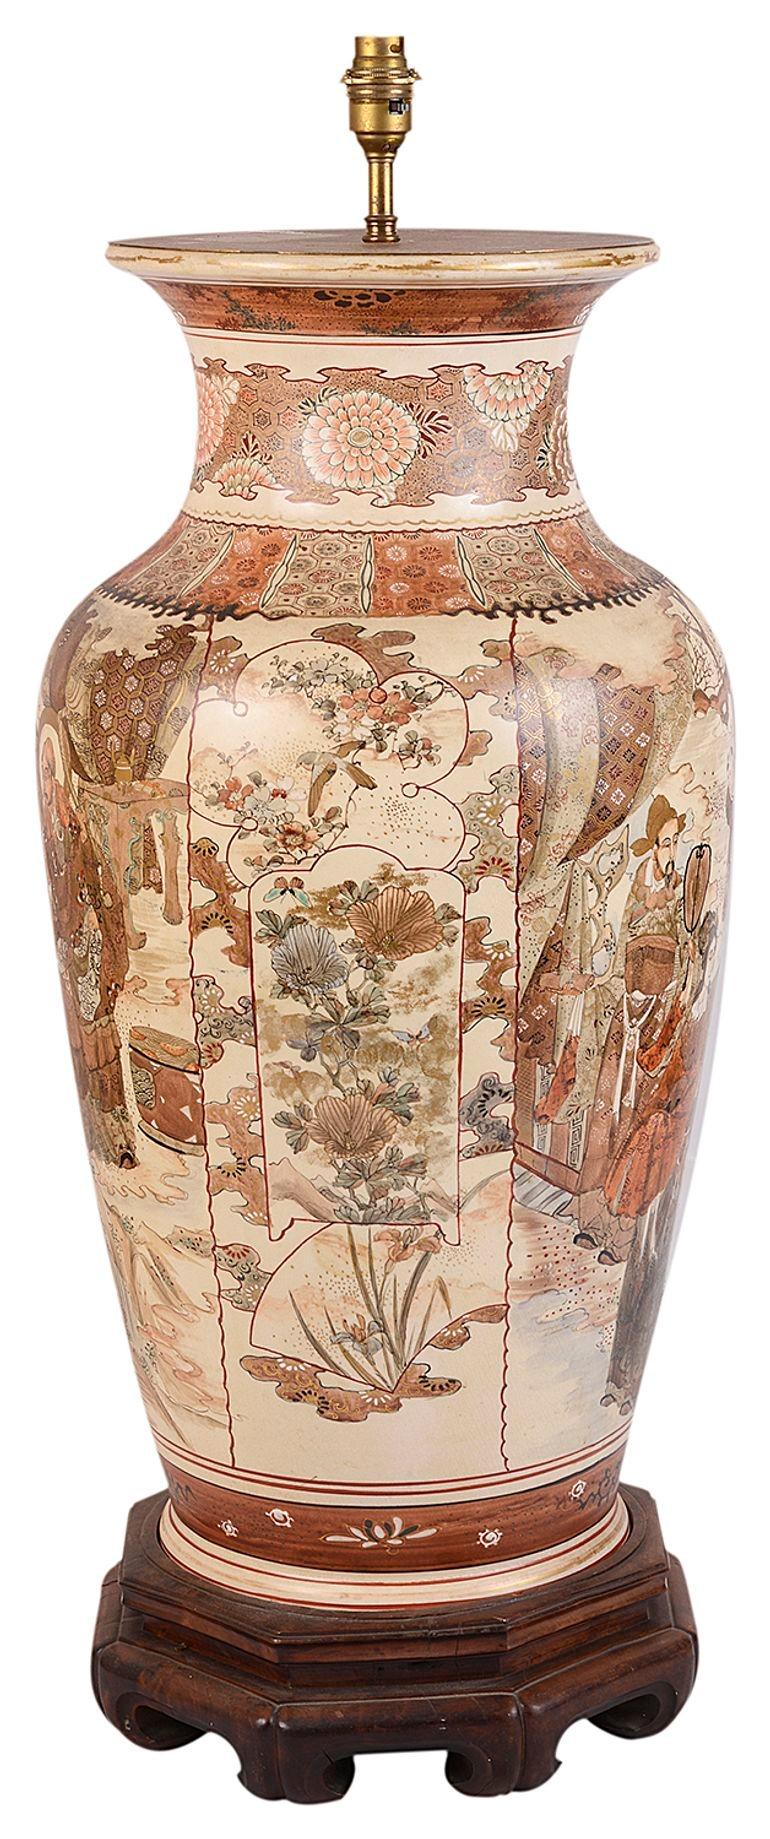 A good quality late 19th century Japanese Satsuma porcelain vase / lamp. Having wonderful classical hand painted scenes of courtiers, tradesman and children between boarders of motifs and exotic flowers, raised on a carved wooden base.
 
 
Batch